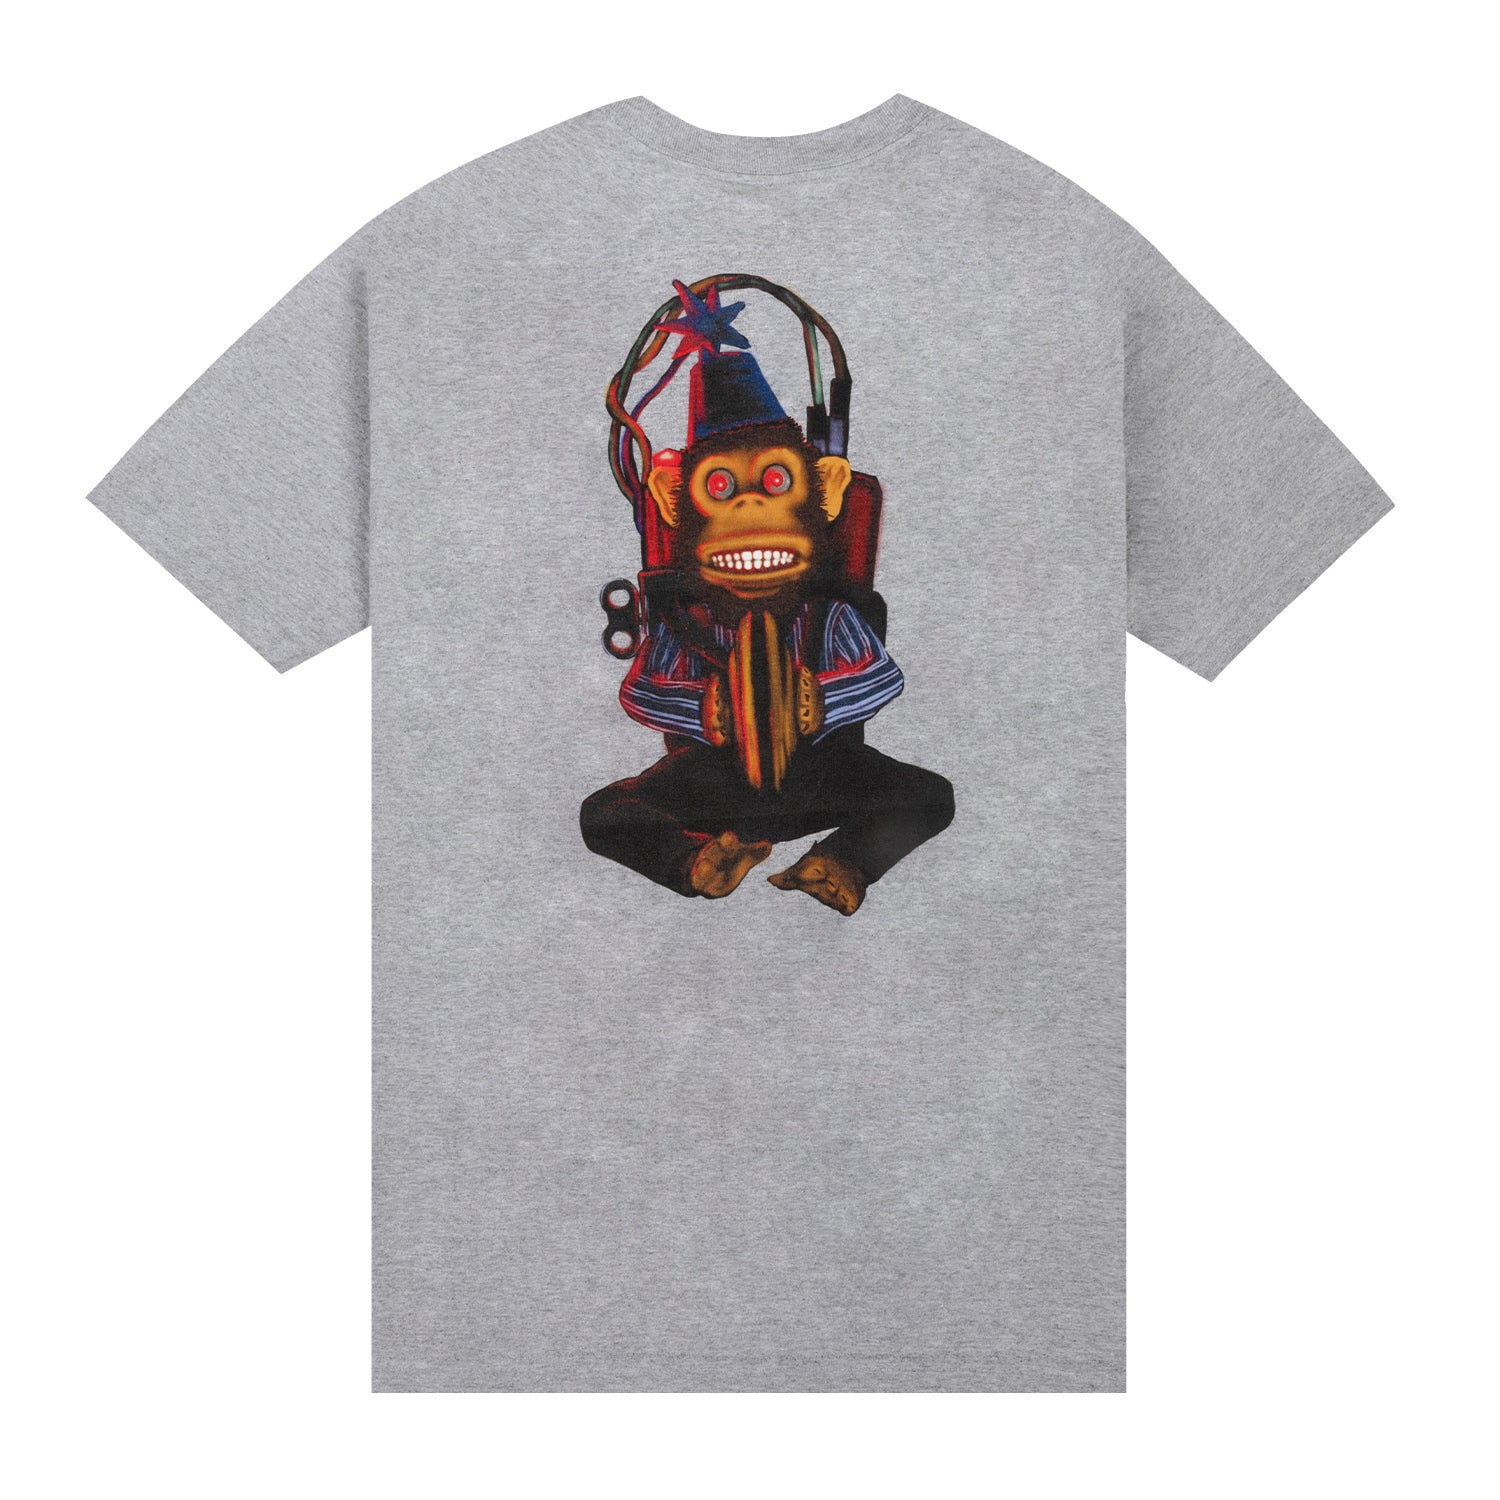 Call of Duty The Hundreds Monkey Bomb Heather Grey T-Shirt- Back View